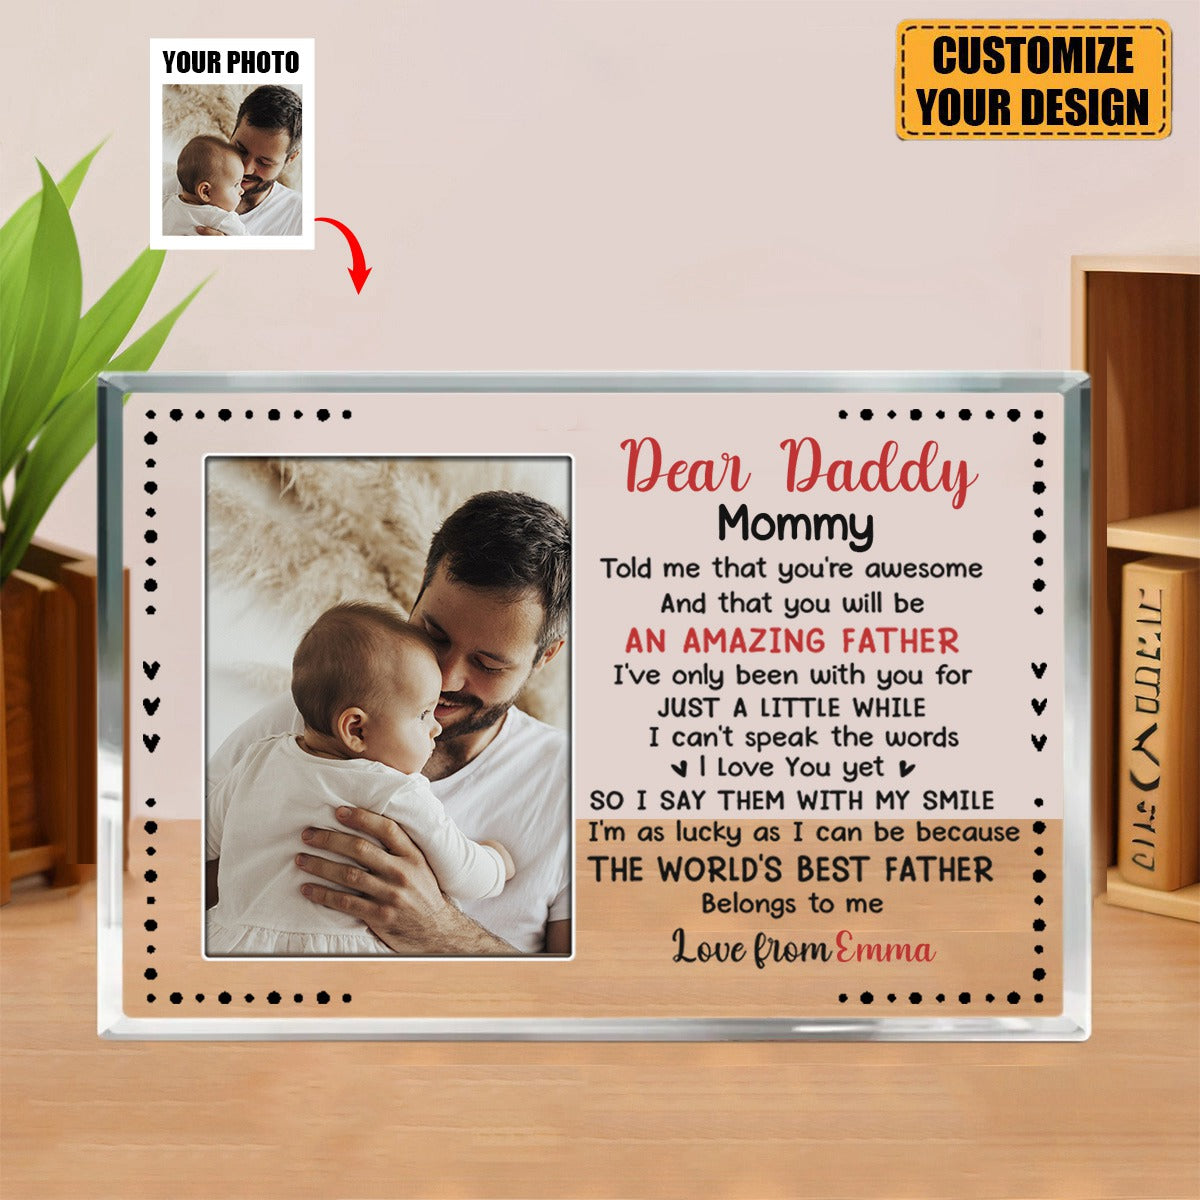 Custom Photo The World's Best Dad Mom - Family Personalized Plaque